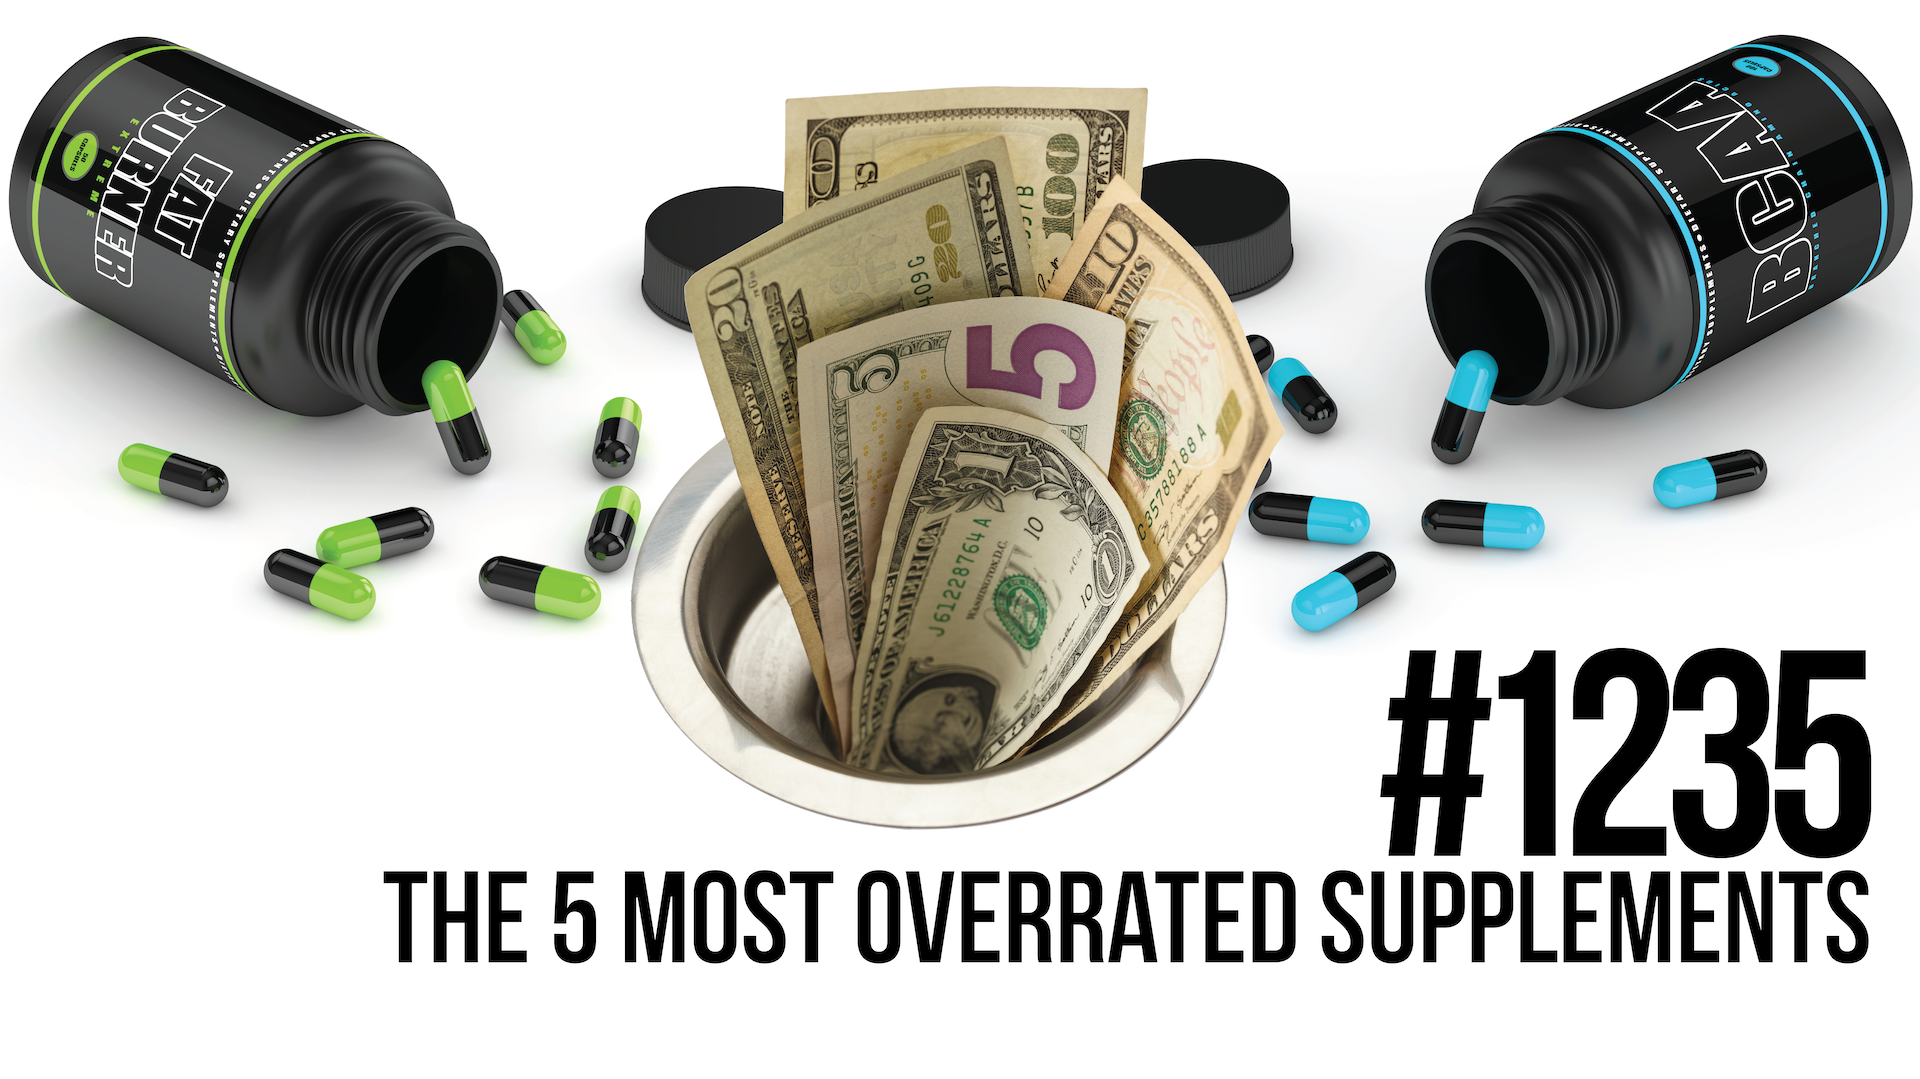 1235: The 5 Most Overrated Supplements